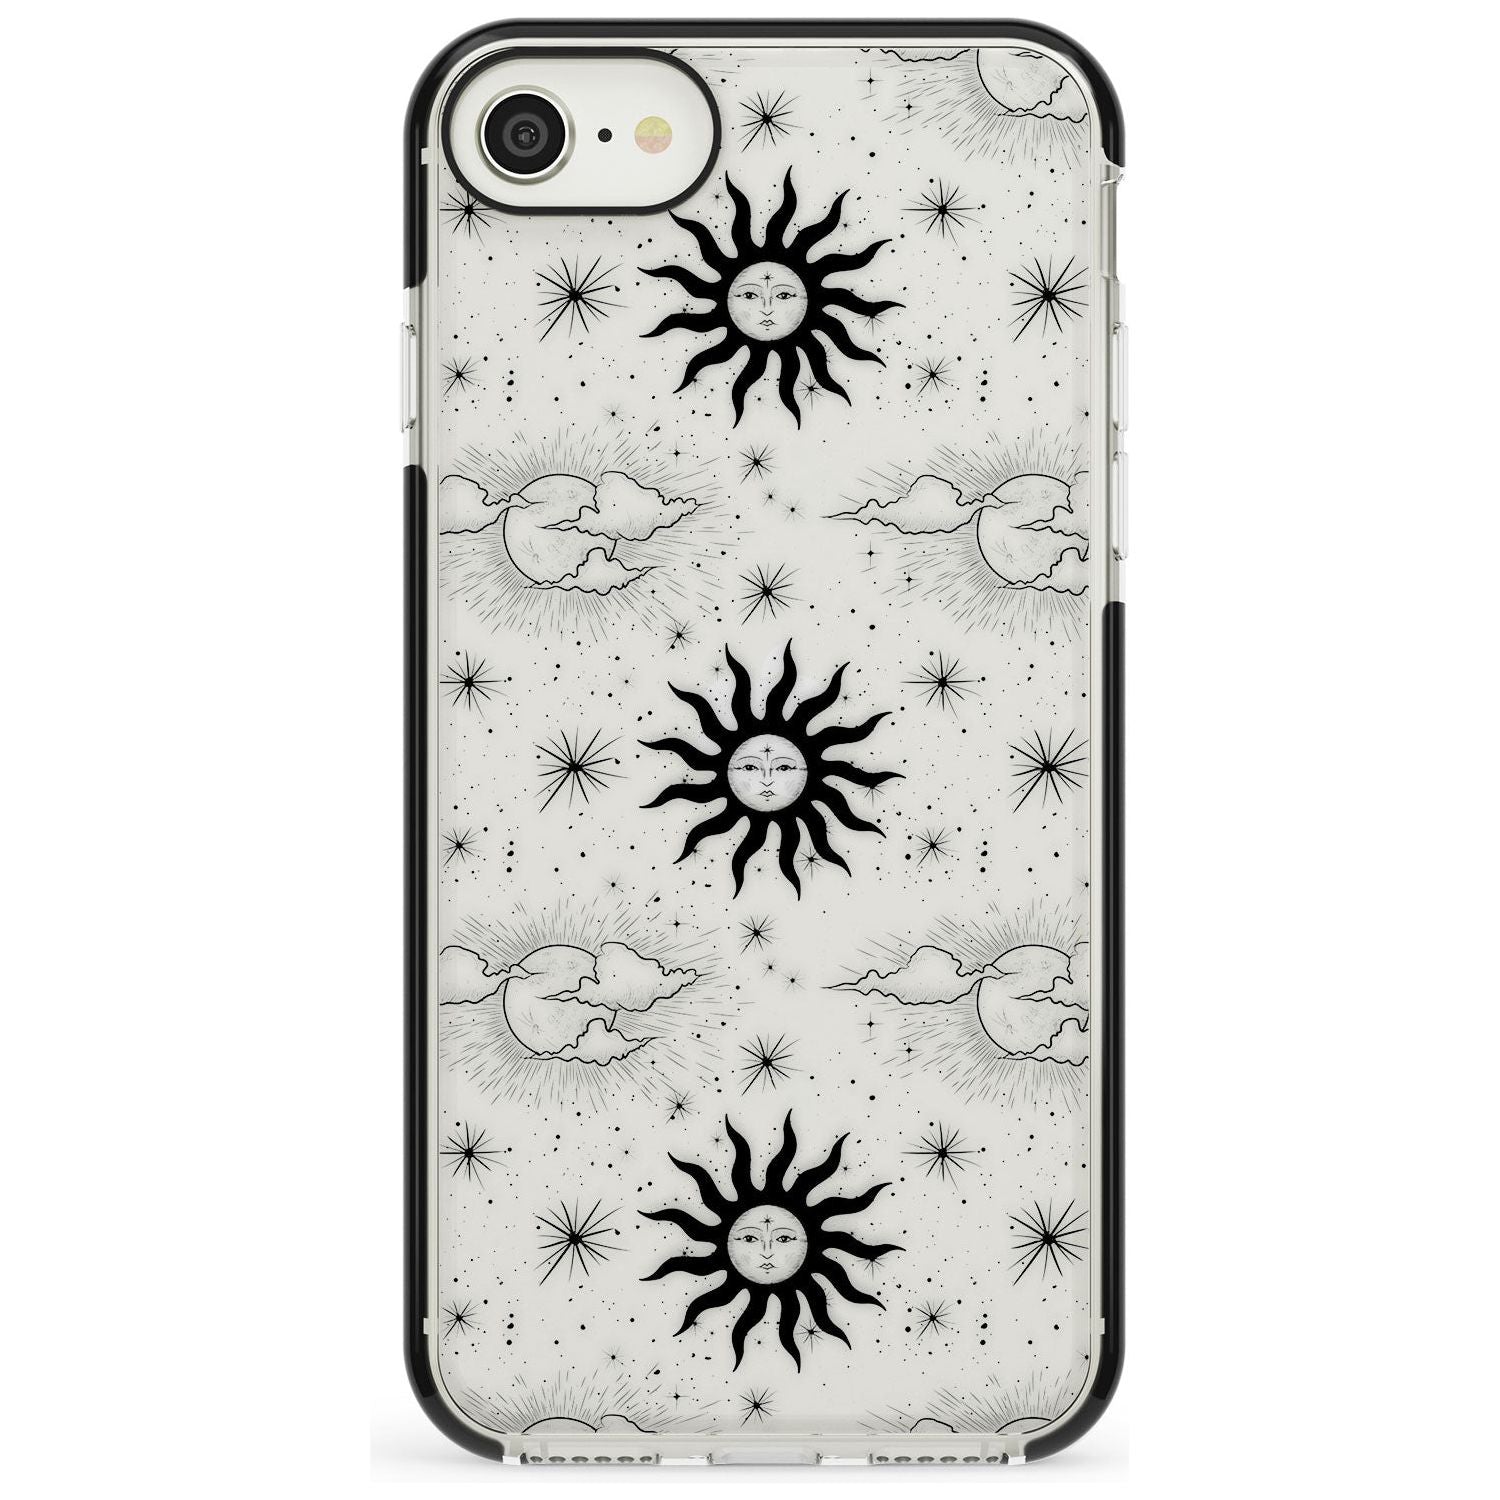 Suns & Clouds Vintage Astrological Black Impact Phone Case for iPhone SE 8 7 Plus